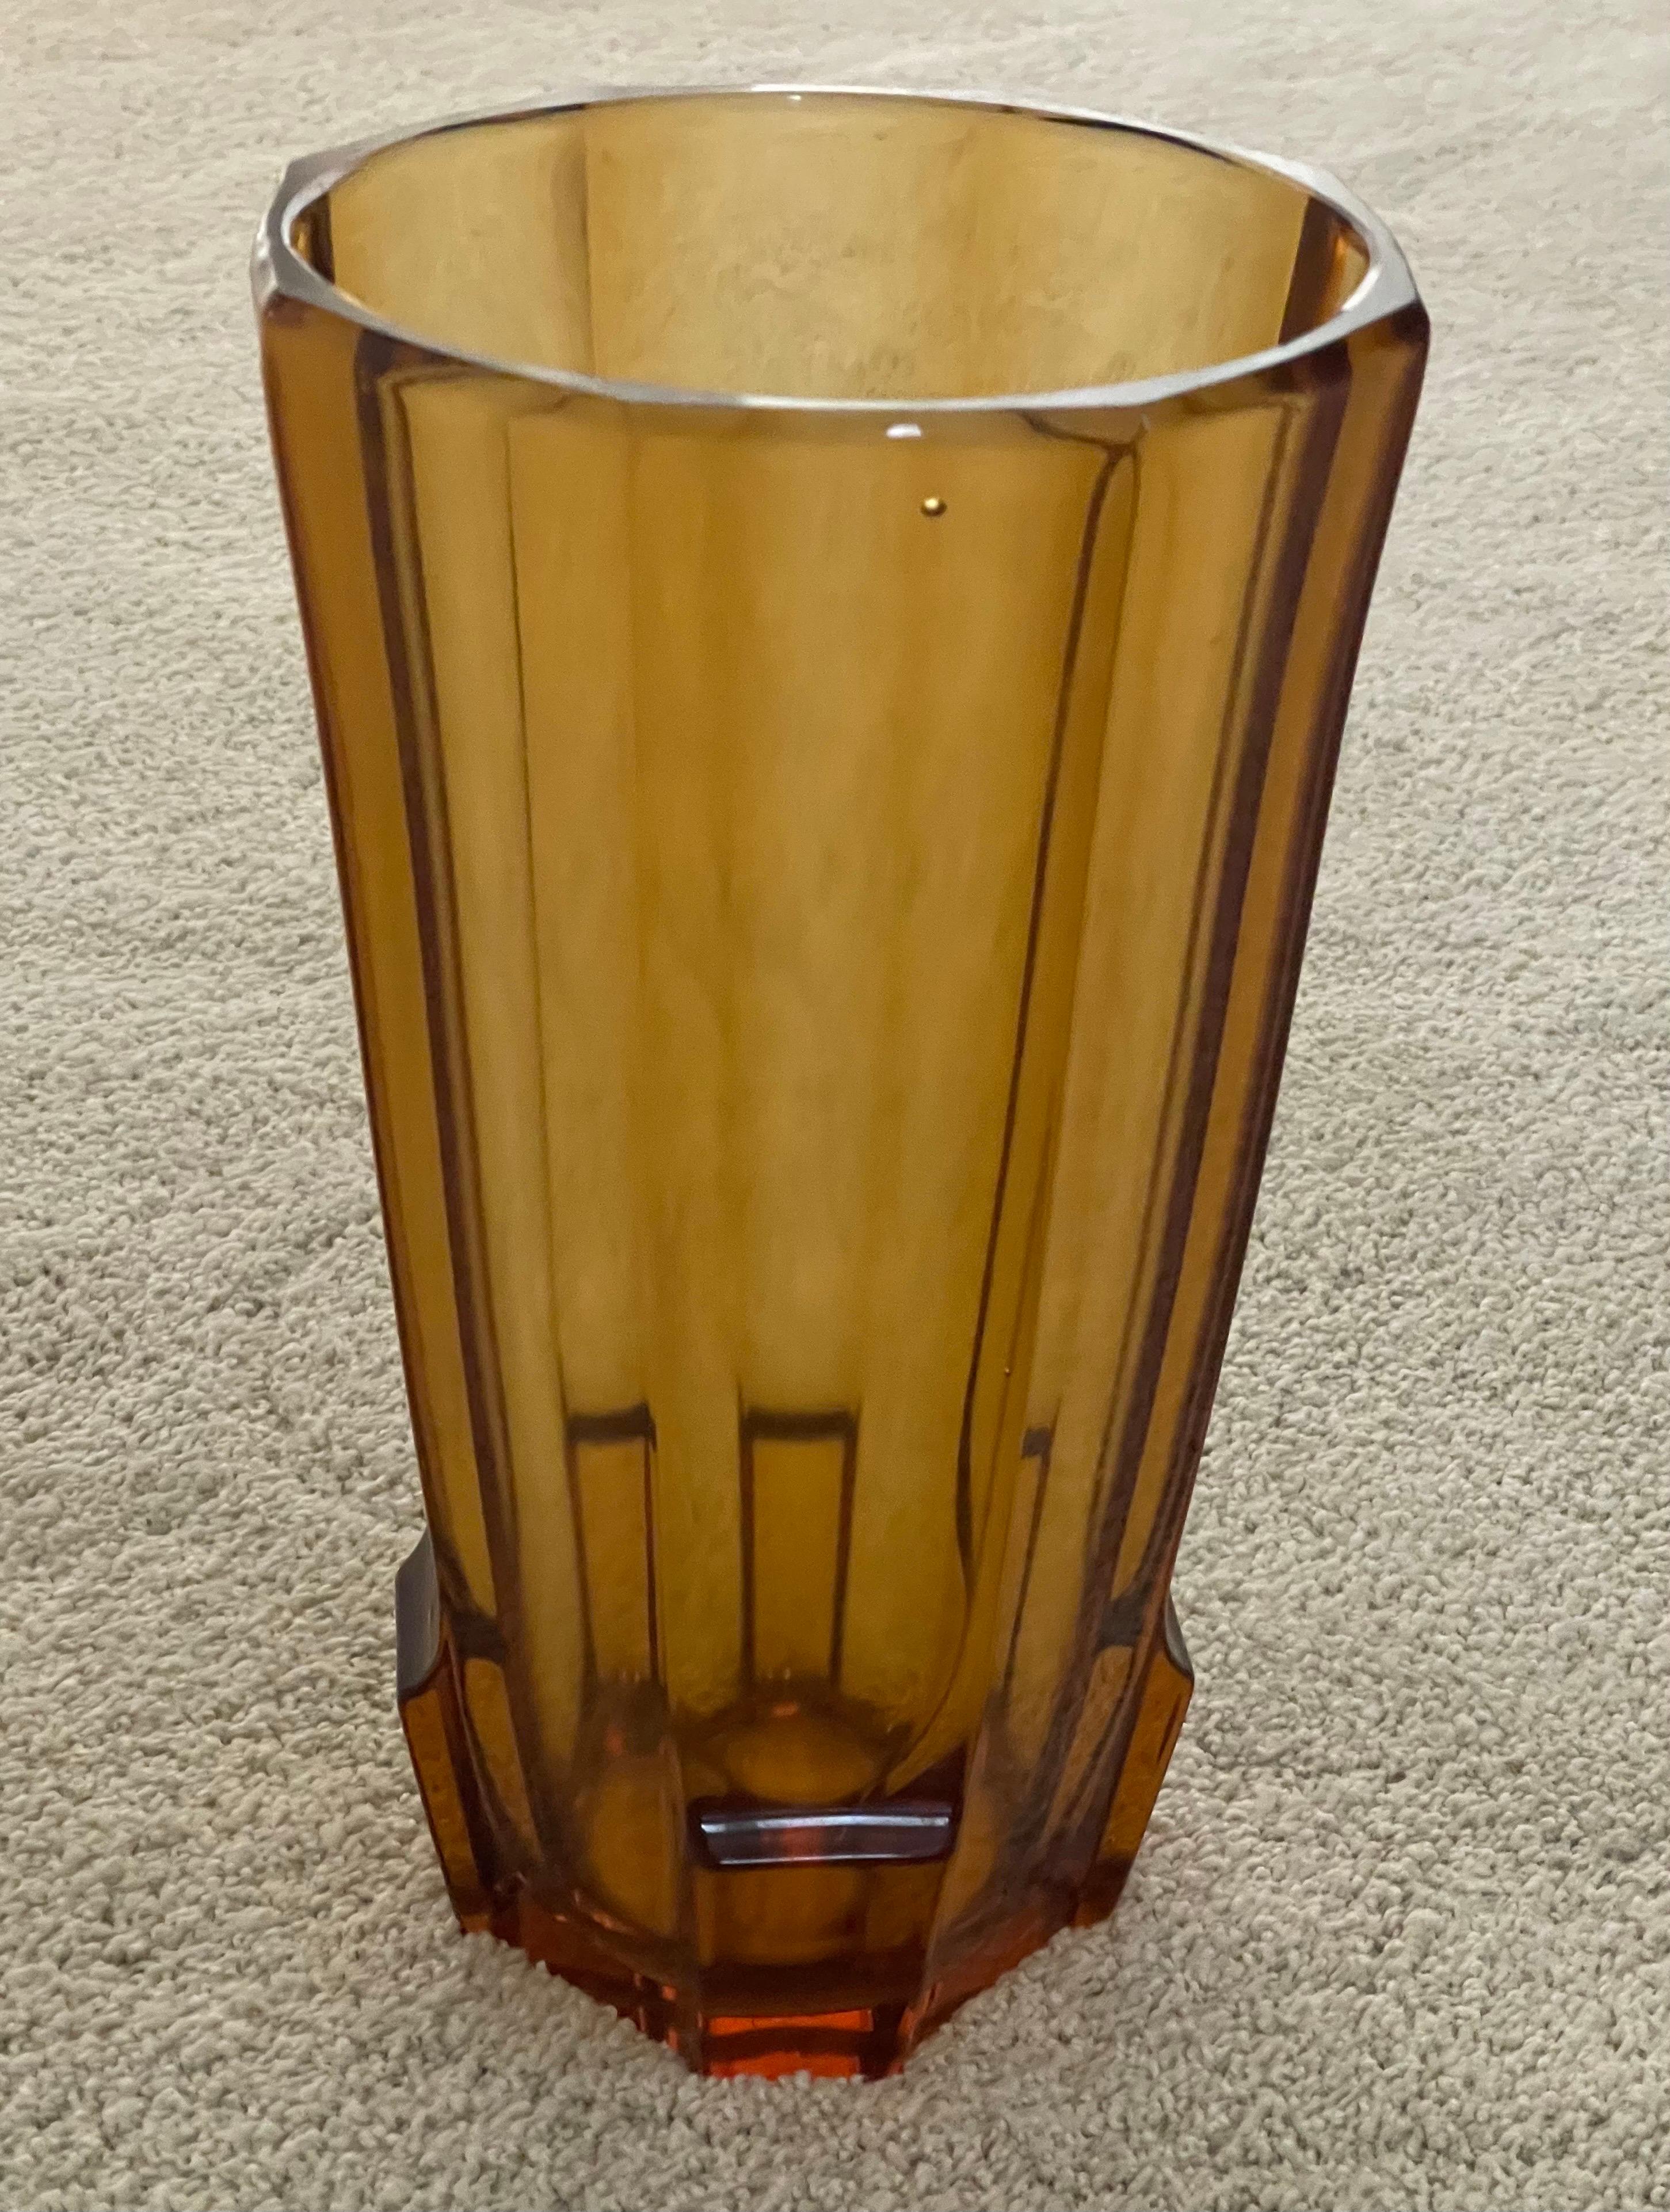 Large Art Deco amber colored art glass faceted vase by Josef Hoffmann for Moser Glassworks, circa 1930s. The piece is in very good vintage condition with no chips or cracks (there are a few small air bubbles in the piece) and measures 6.5